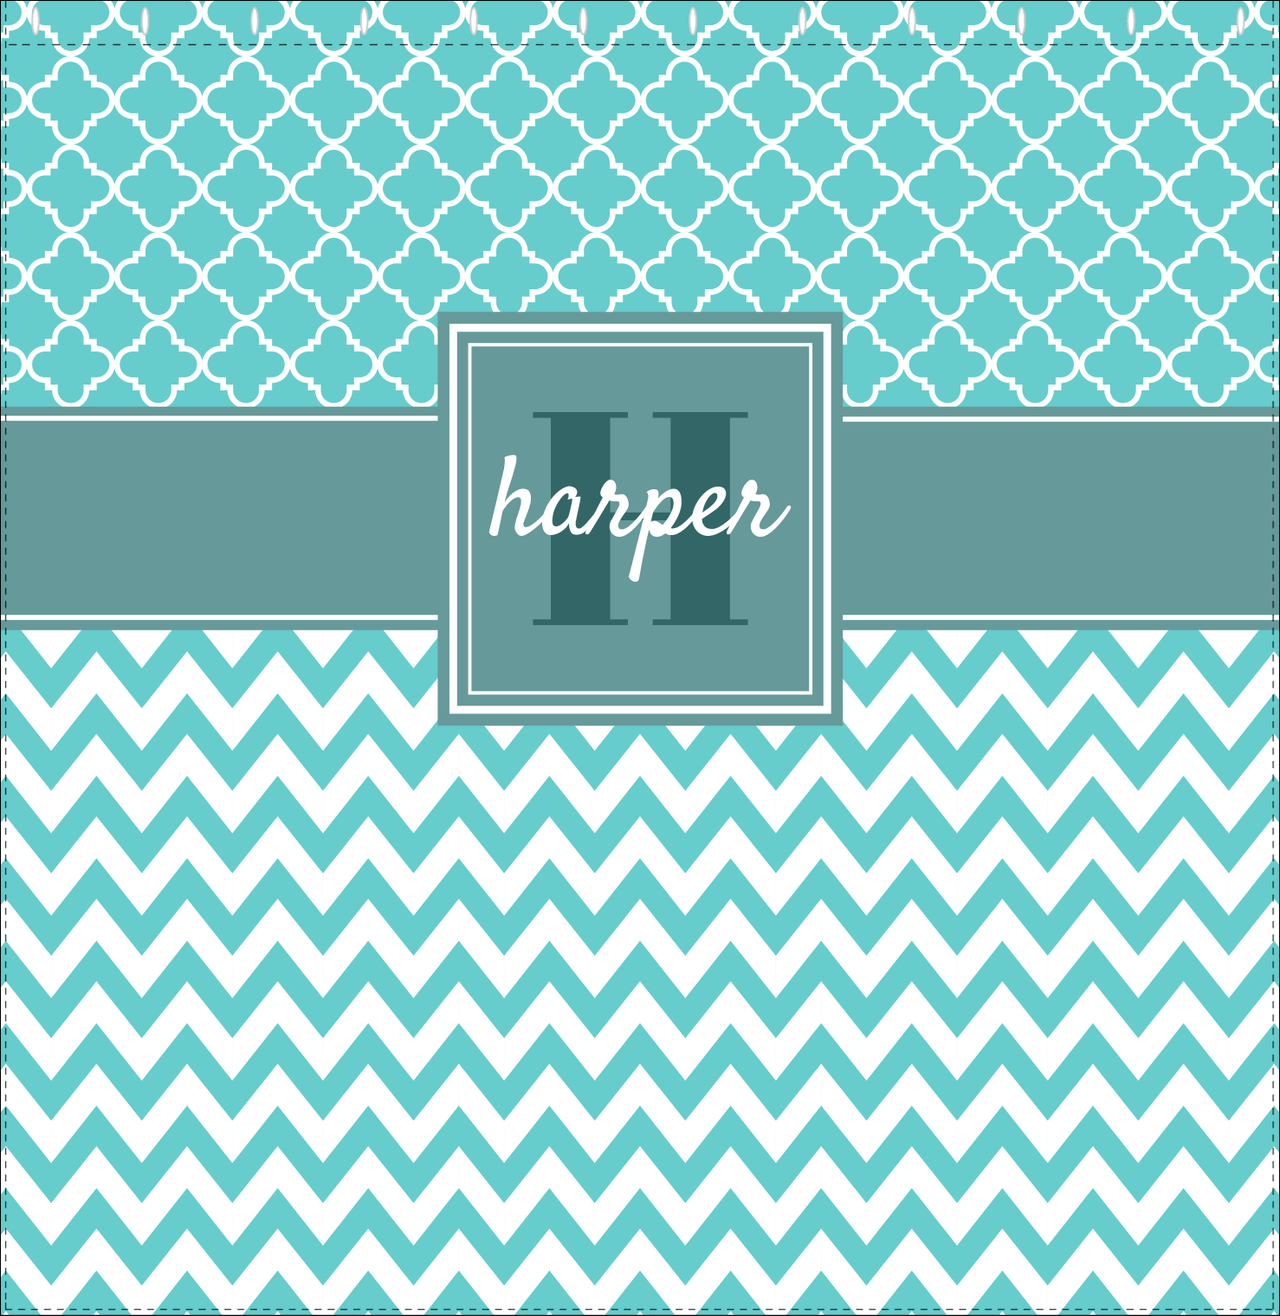 Personalized Quatrefoil and Chevron I Shower Curtain - Teal and White - Square Nameplate - Decorate View